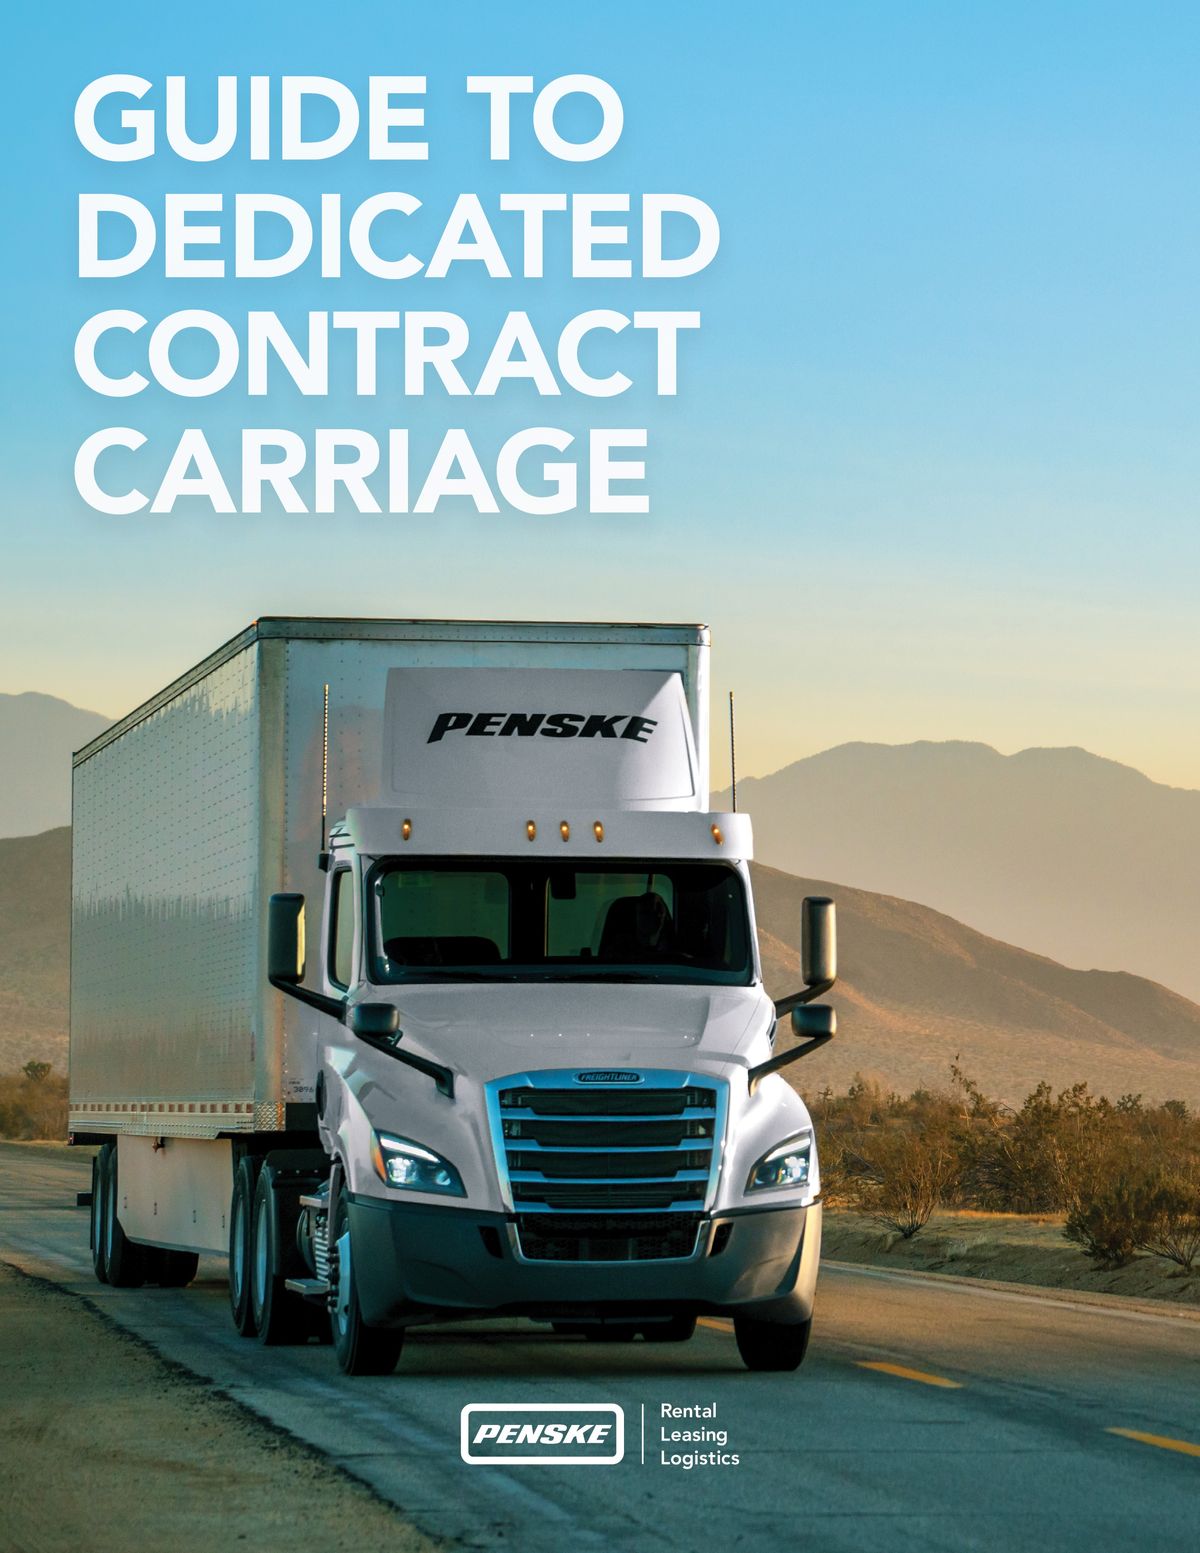 Penske Logistics Delivers New Guide to Dedicated Contract Carriage Services